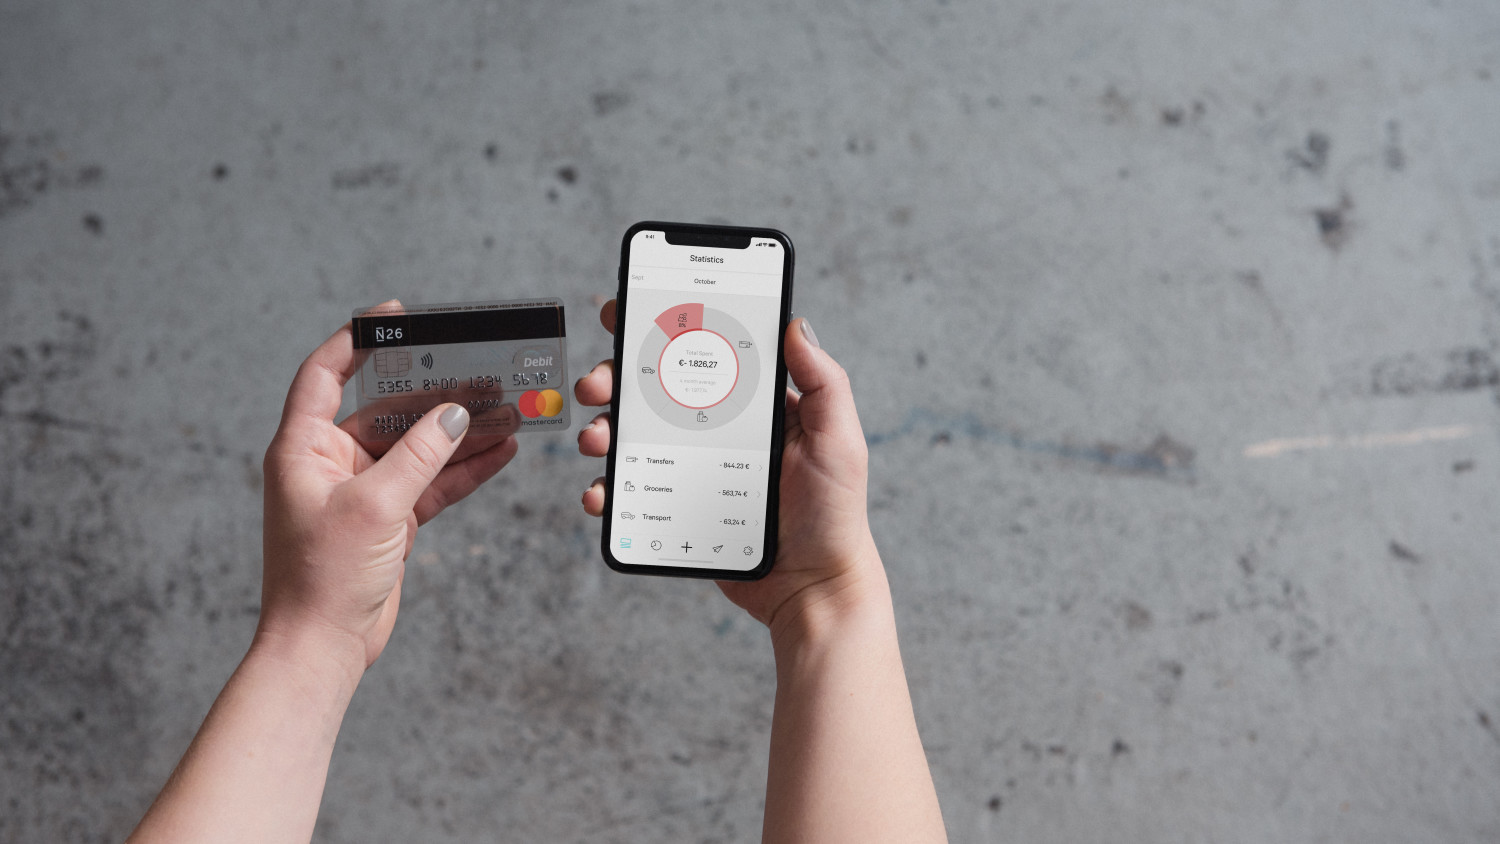 N26 Press Image showing a person sitting while holding the N26 Debitcard Mastercard and her phone